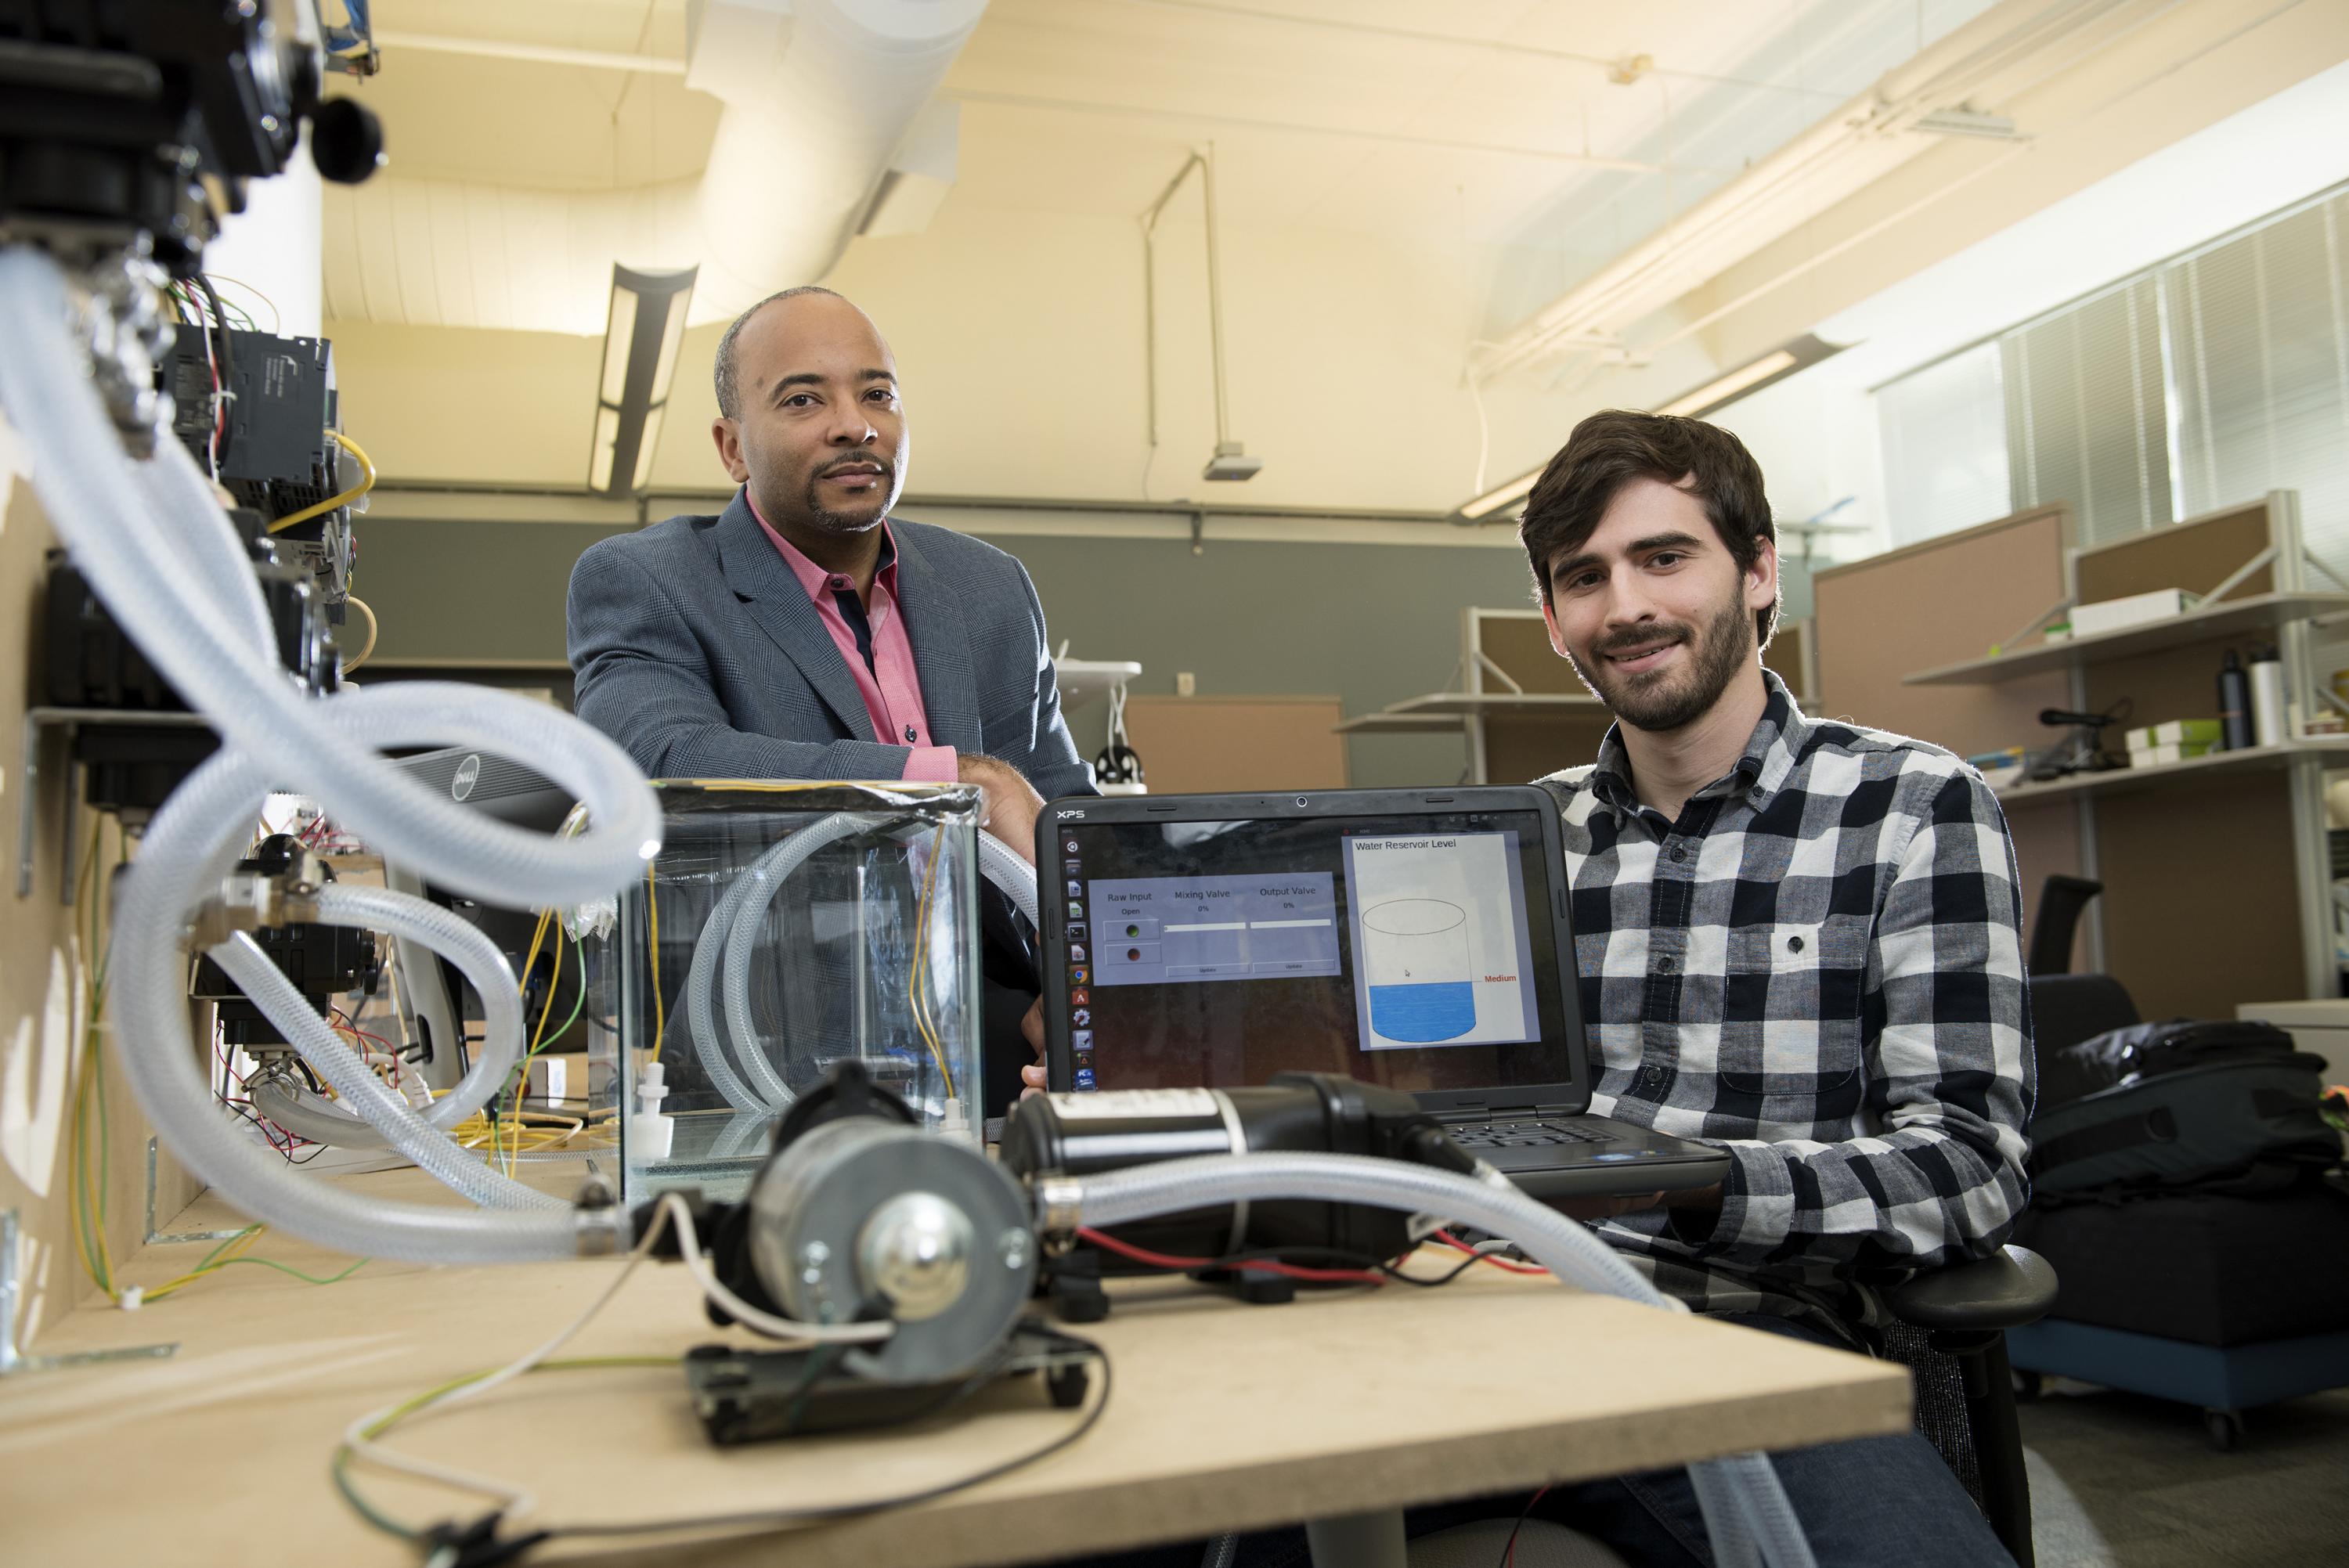 Georgia Tech researchers have developed a new form of ransomware that can take over control of a simulated water treatment plant. The simulated attack was designed to highlight vulnerabilities in the control systems used to operate industrial facilities. Shown are (left) Raheem Beyah, associate chair in the Georgia Tech School of Electrical and Computer Engineering, and David Formby, a Georgia Tech Ph.D. student. (Credit: Christopher Moore, Georgia Tech) 